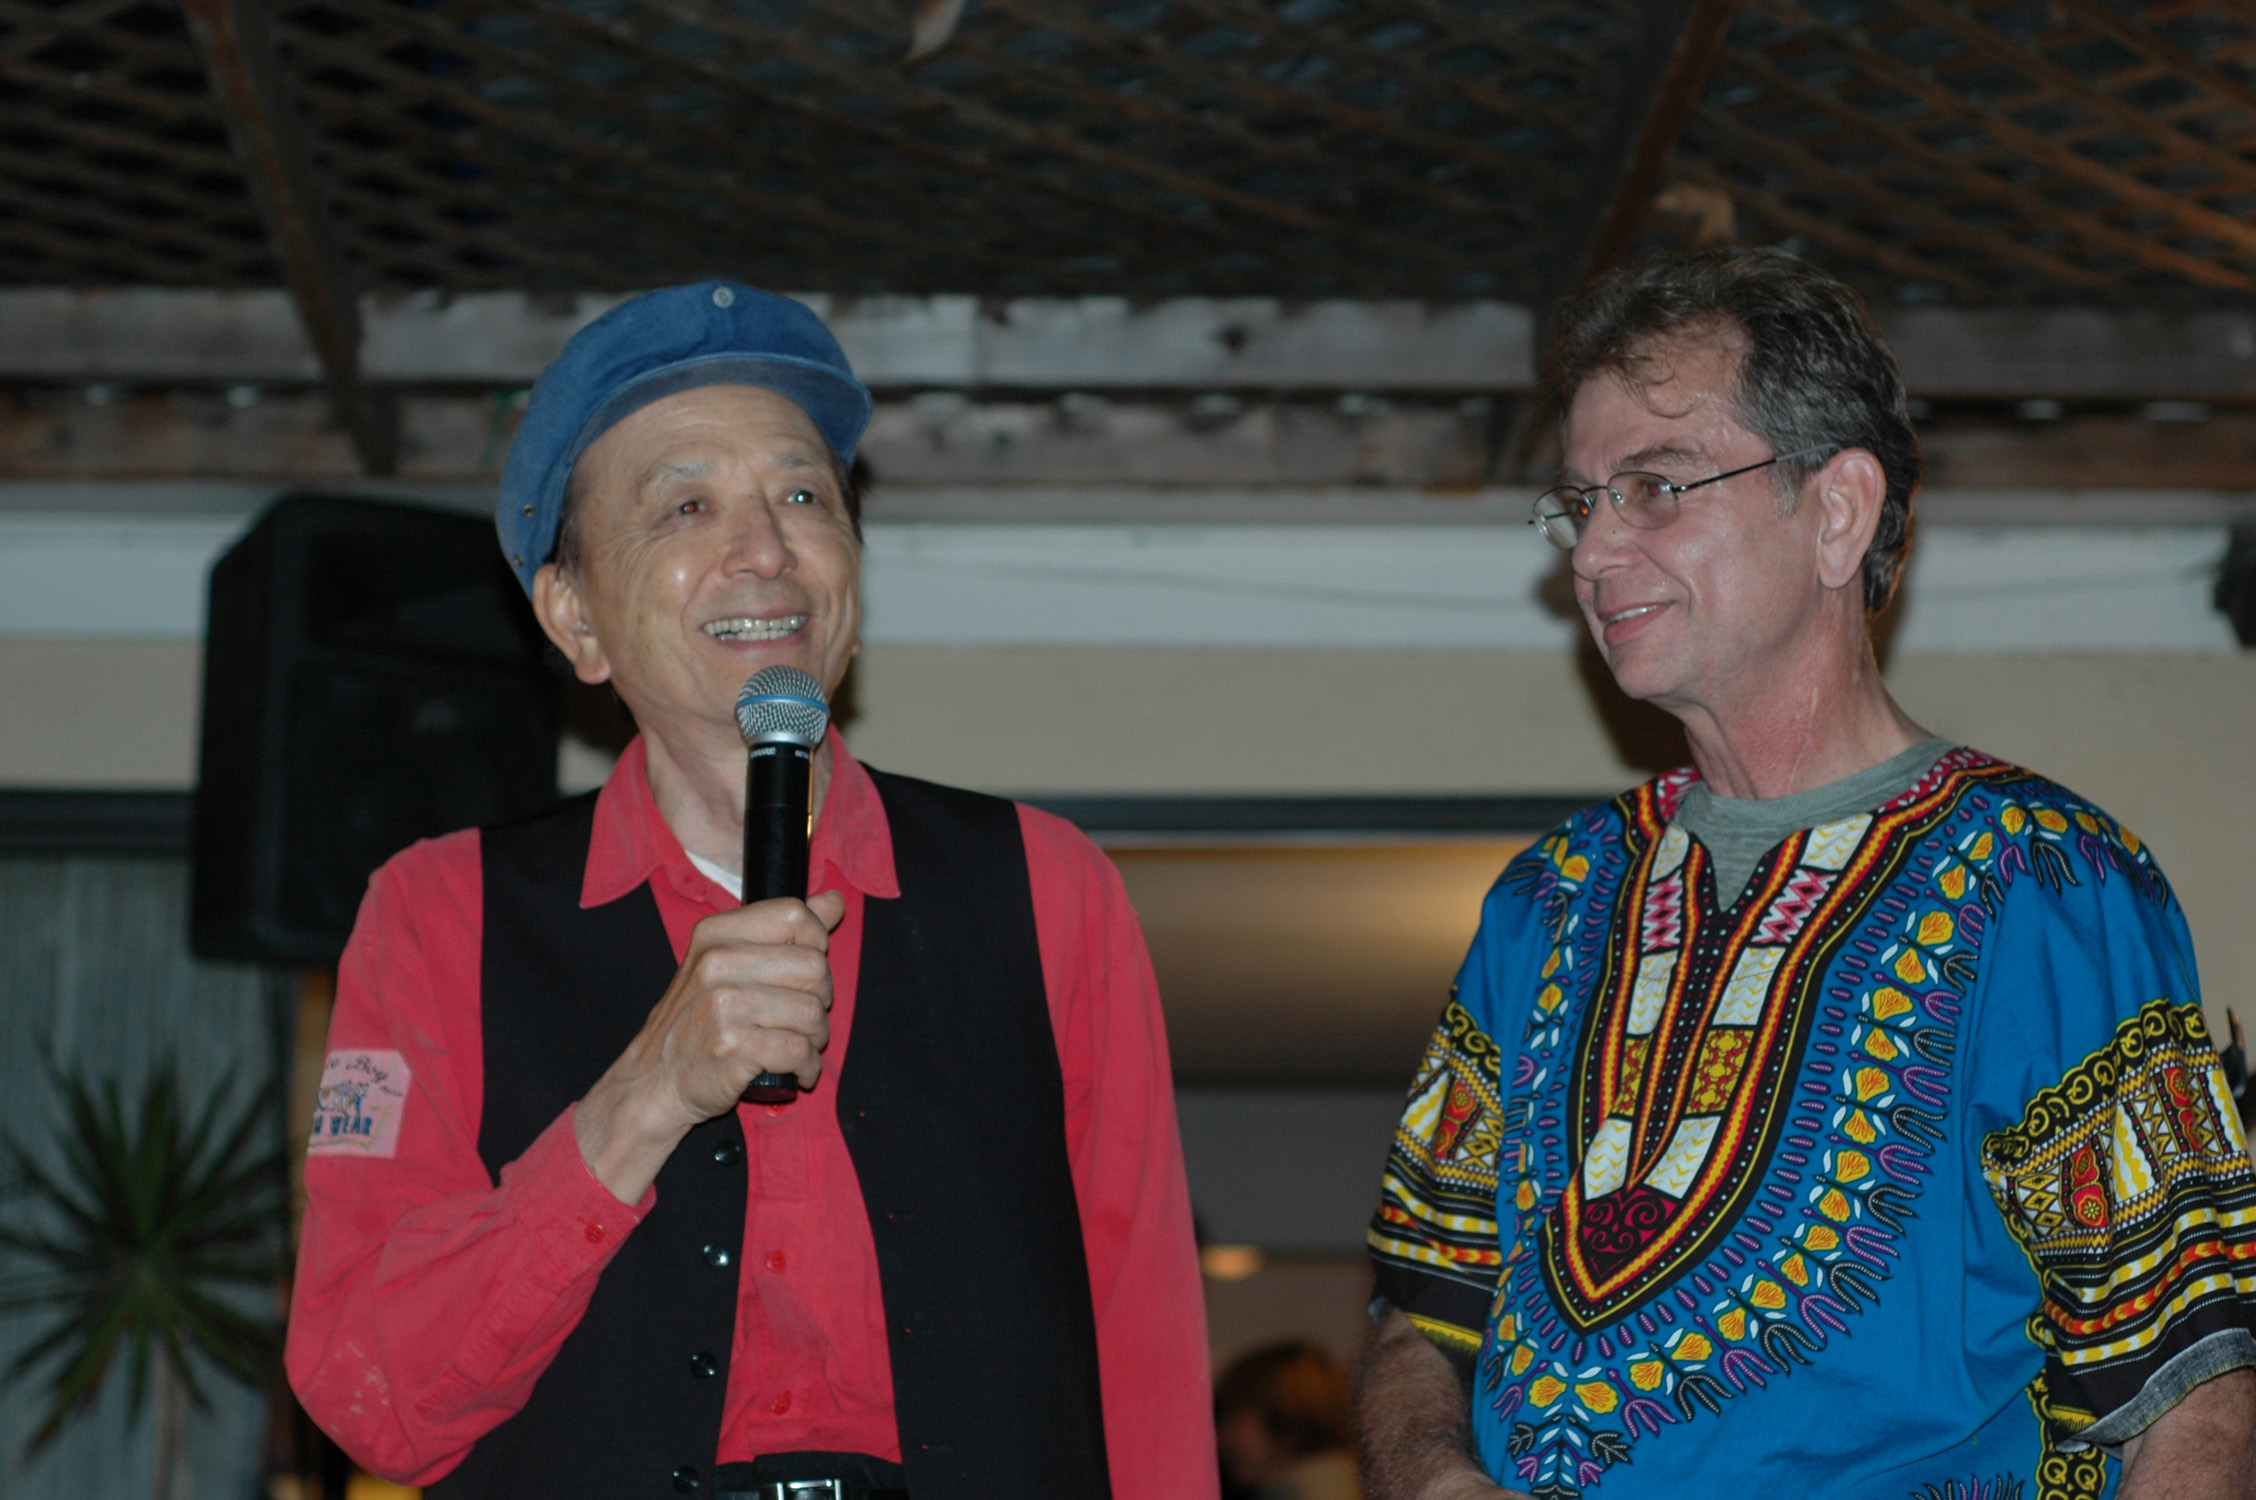 Hollywood legend James Hong with Bob Nuchow in Culver City at Bob's going away party